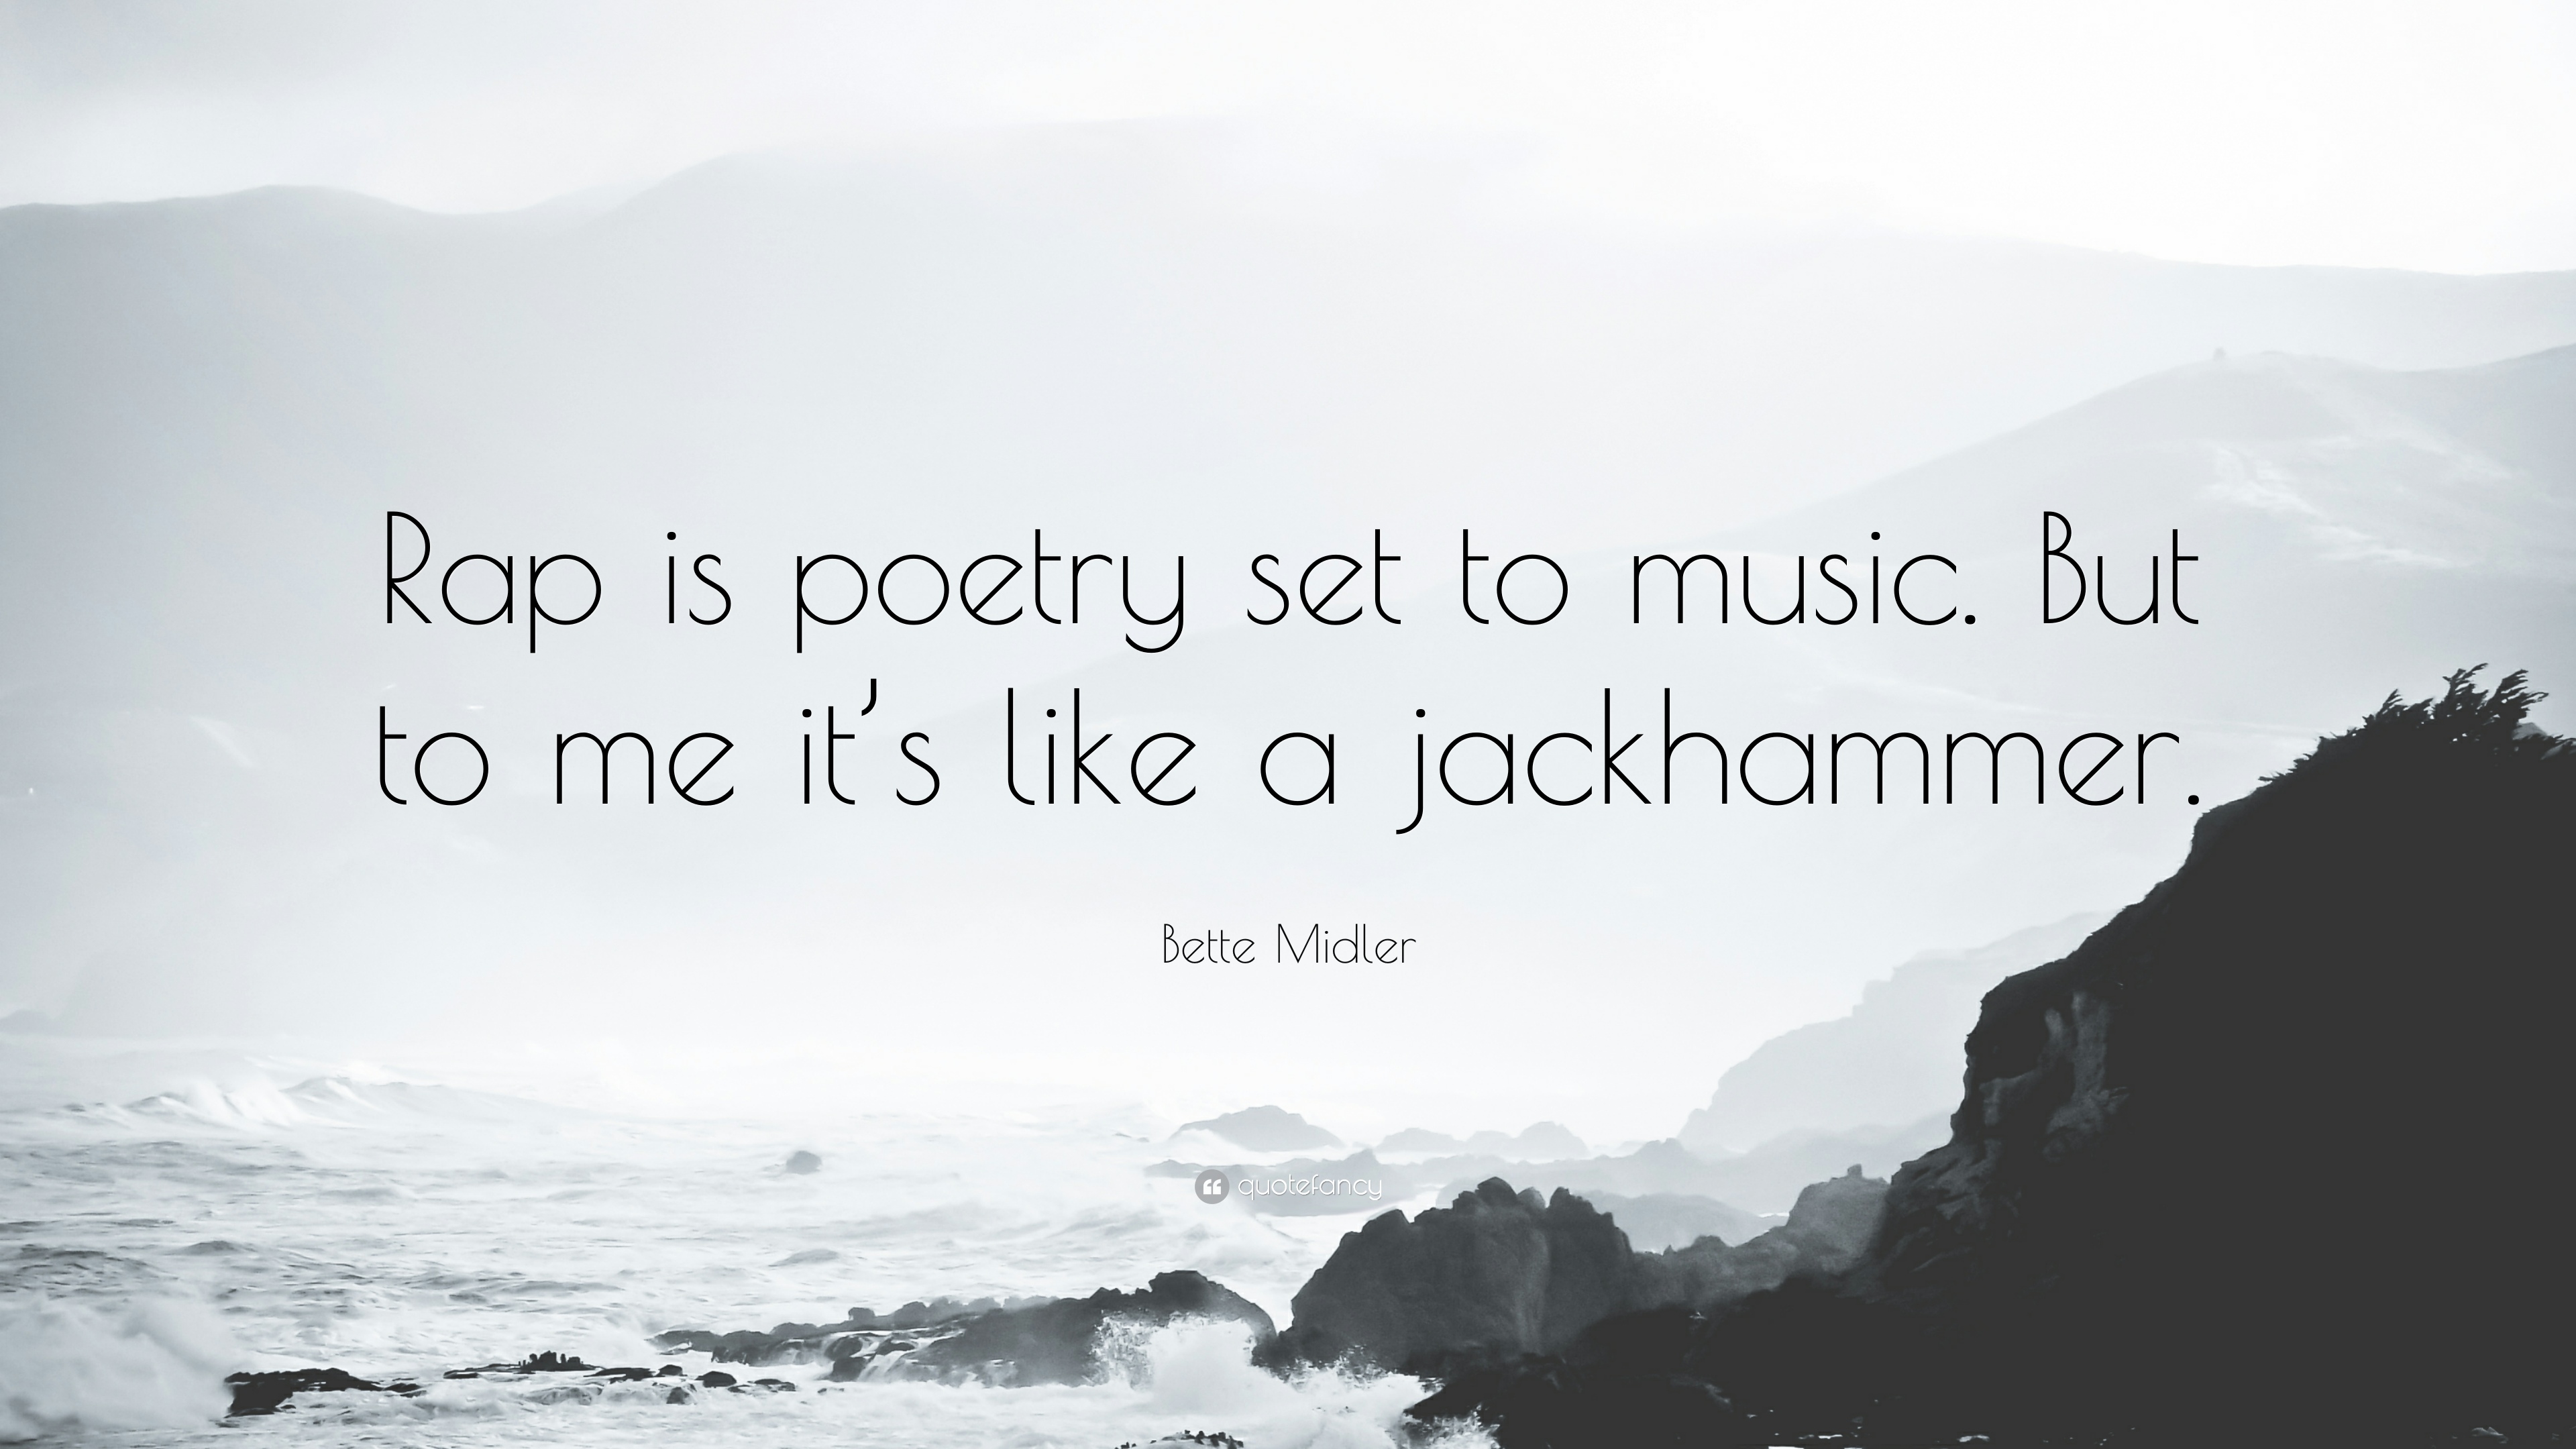 Bette Midler Quote: “Rap is poetry set to music. But to me it's like a jackhammer.”